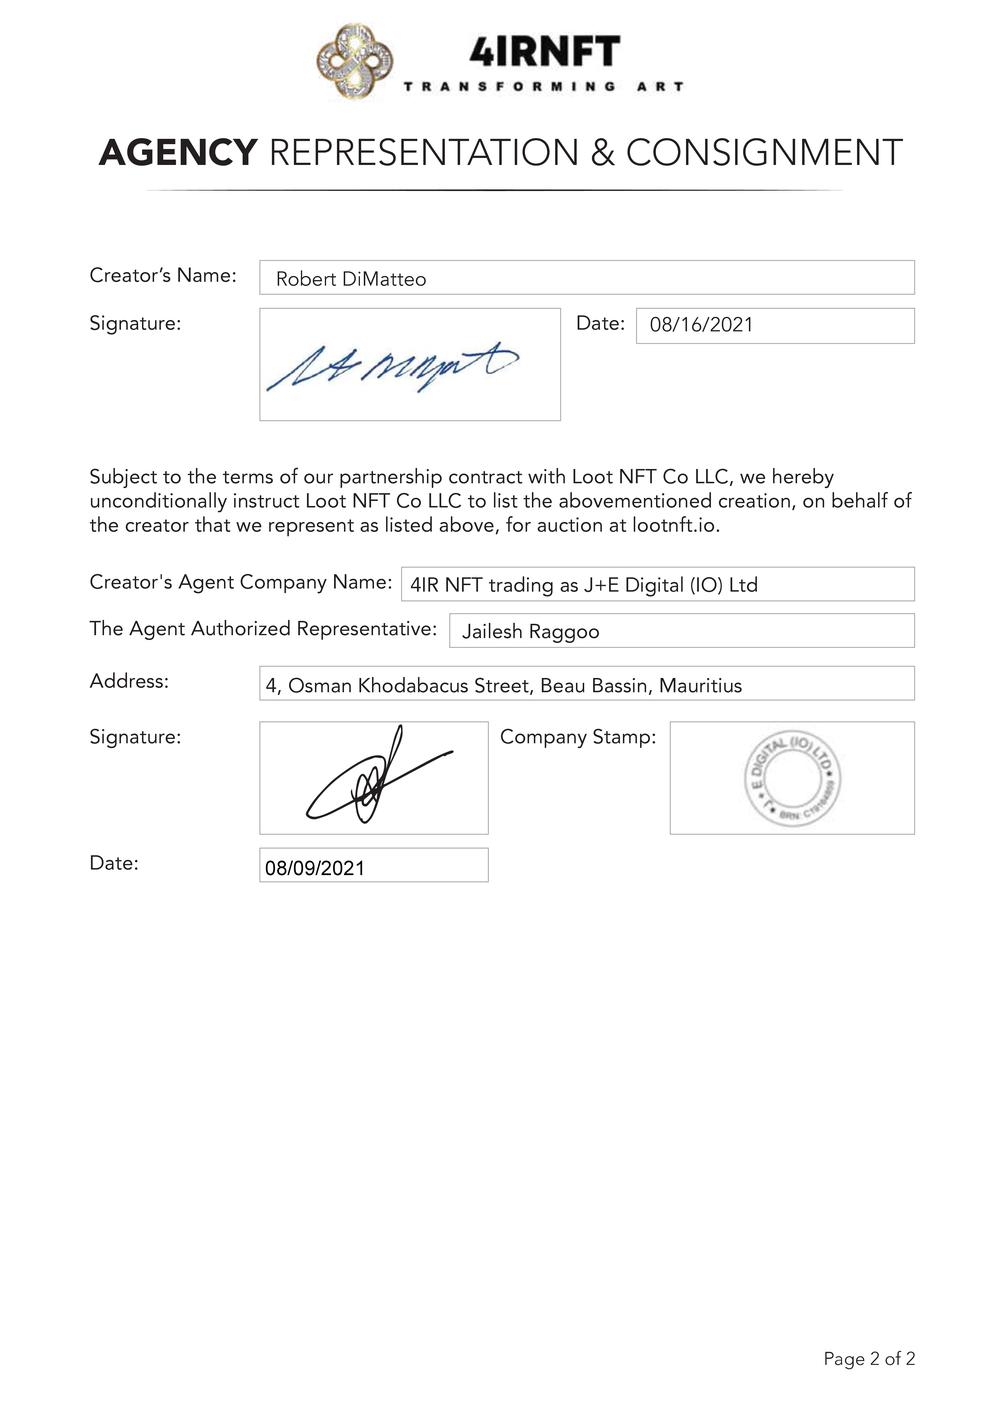 Certificate of Authenticity and Consignment - Oxygen - 1